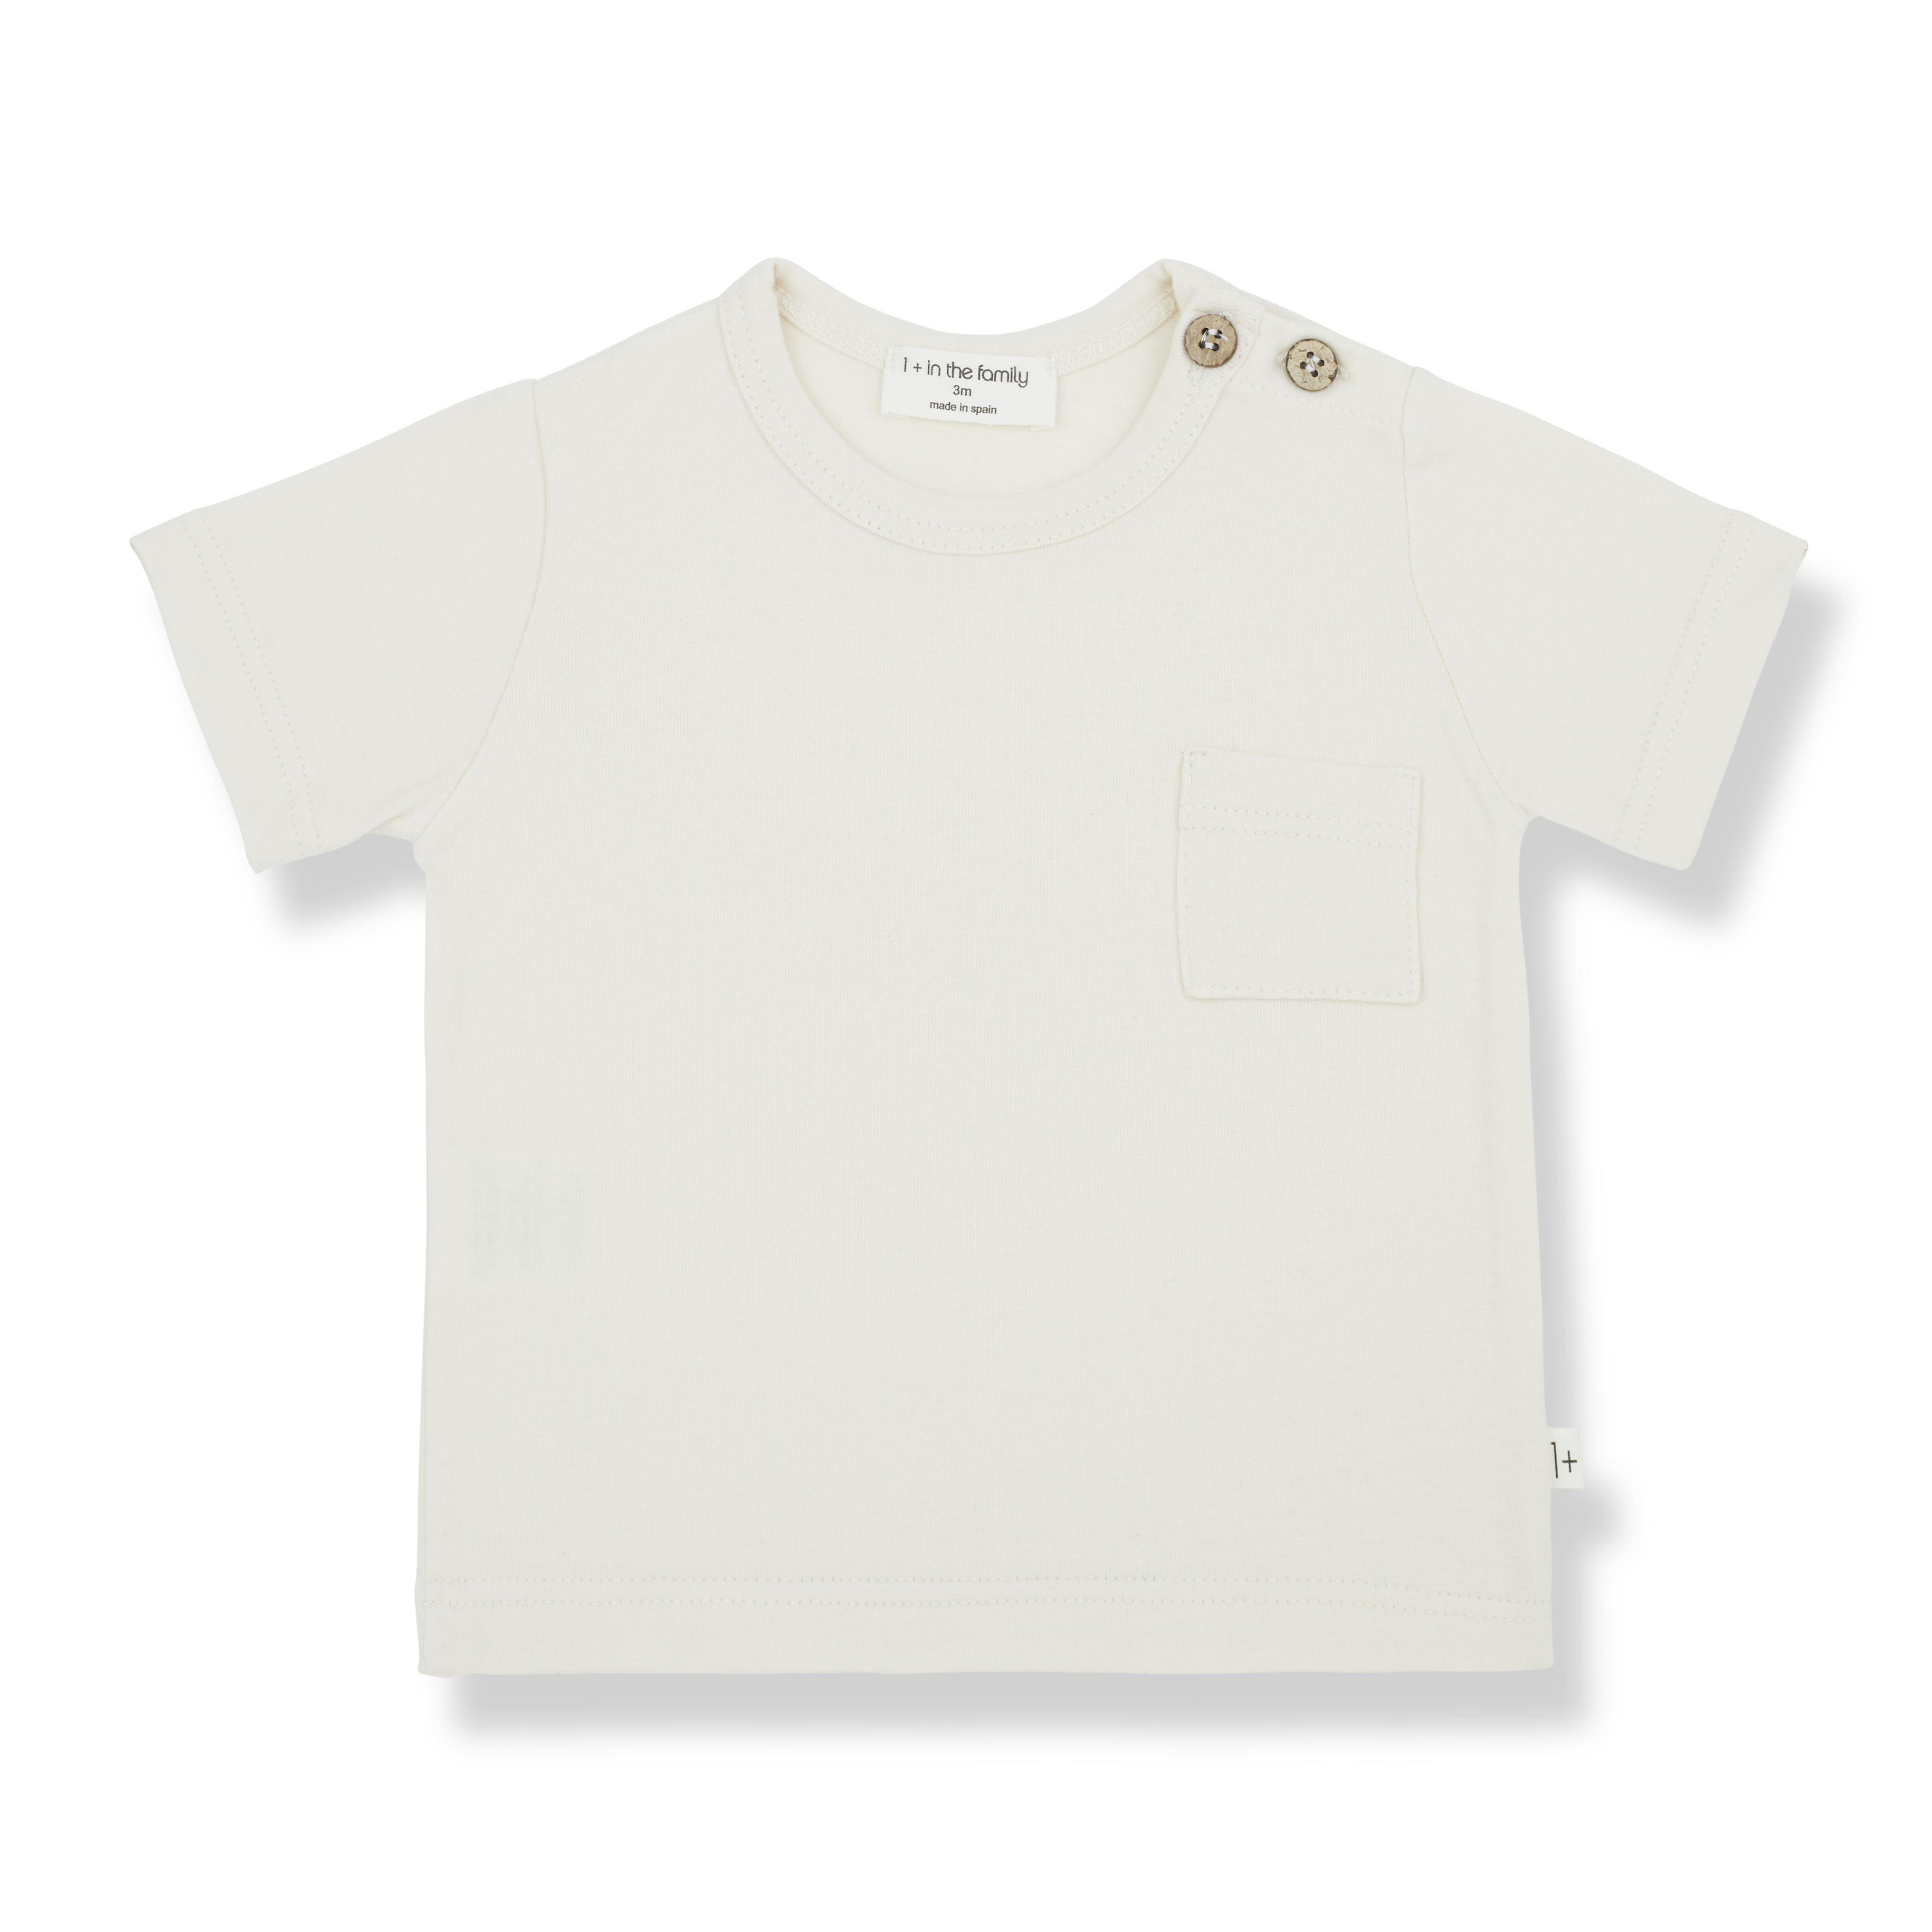 1+ in the family - leon - plain jersey t-shirt - ivory